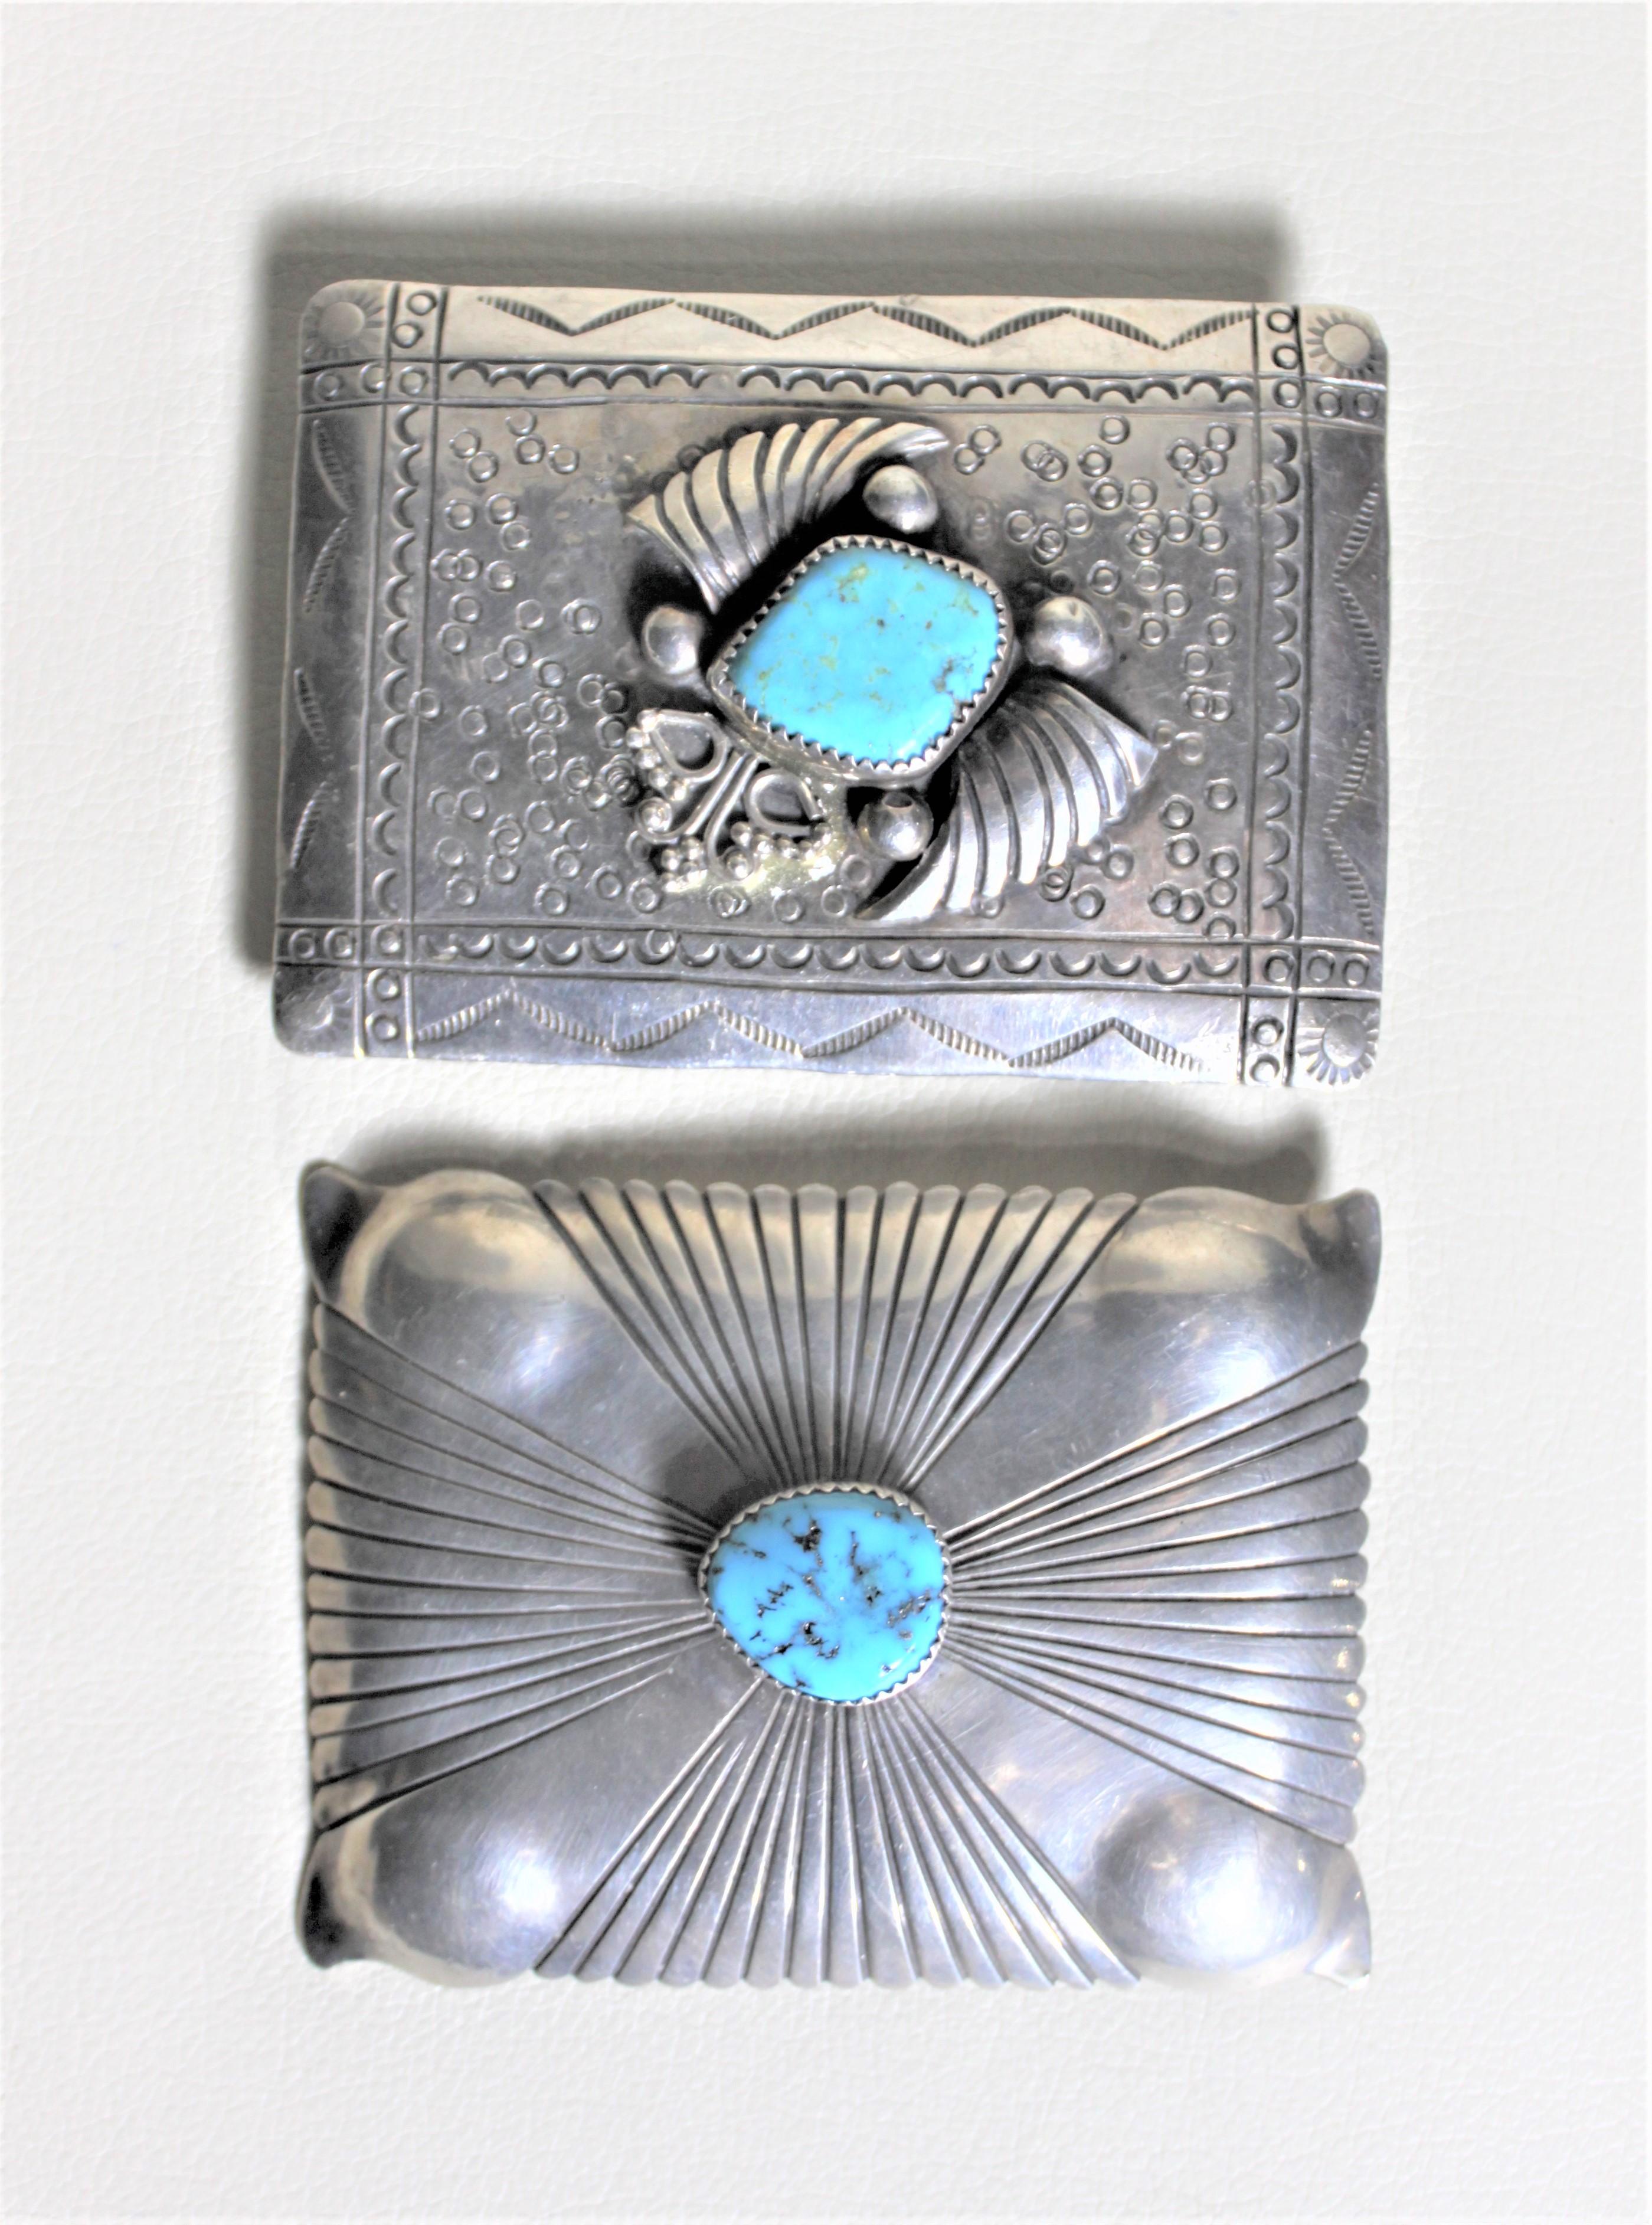 This pair of midcentury silver and turquoise belt buckles are presumed to have been made in the United States in approximately 1965. The buckle pictured in the top features a central inlaid turquoise stone surrounded by metal work resembling